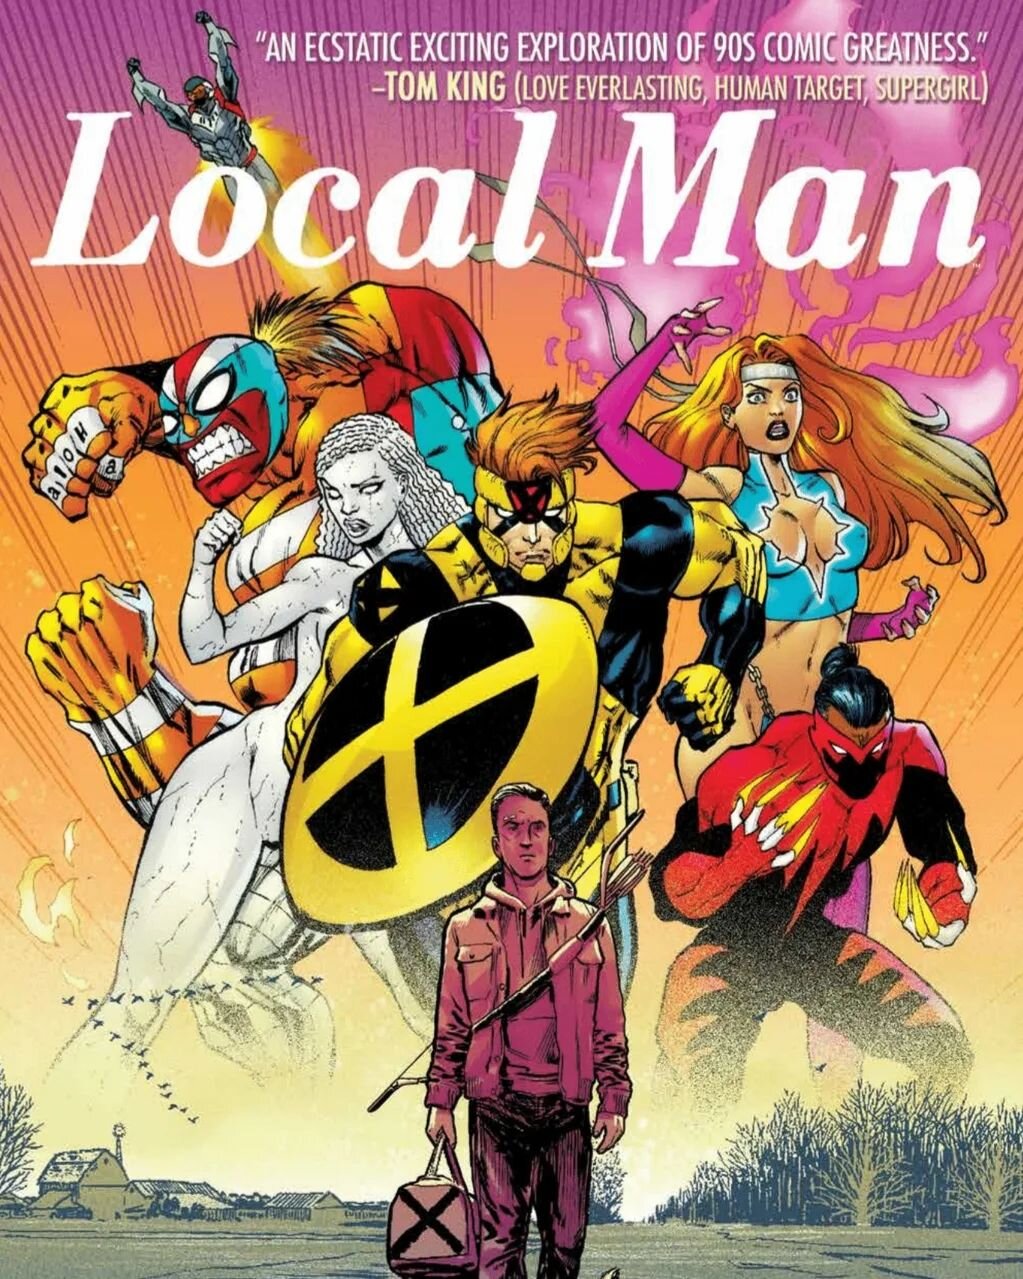 We have some wonderful events to kick off the springtime! We're hosting a book signing on April 20th to celebrate the release of our Bluebird regular (our local man) Tim Seeley's new comic, 'Local Man'! Tim has worked as a writer with names such as M